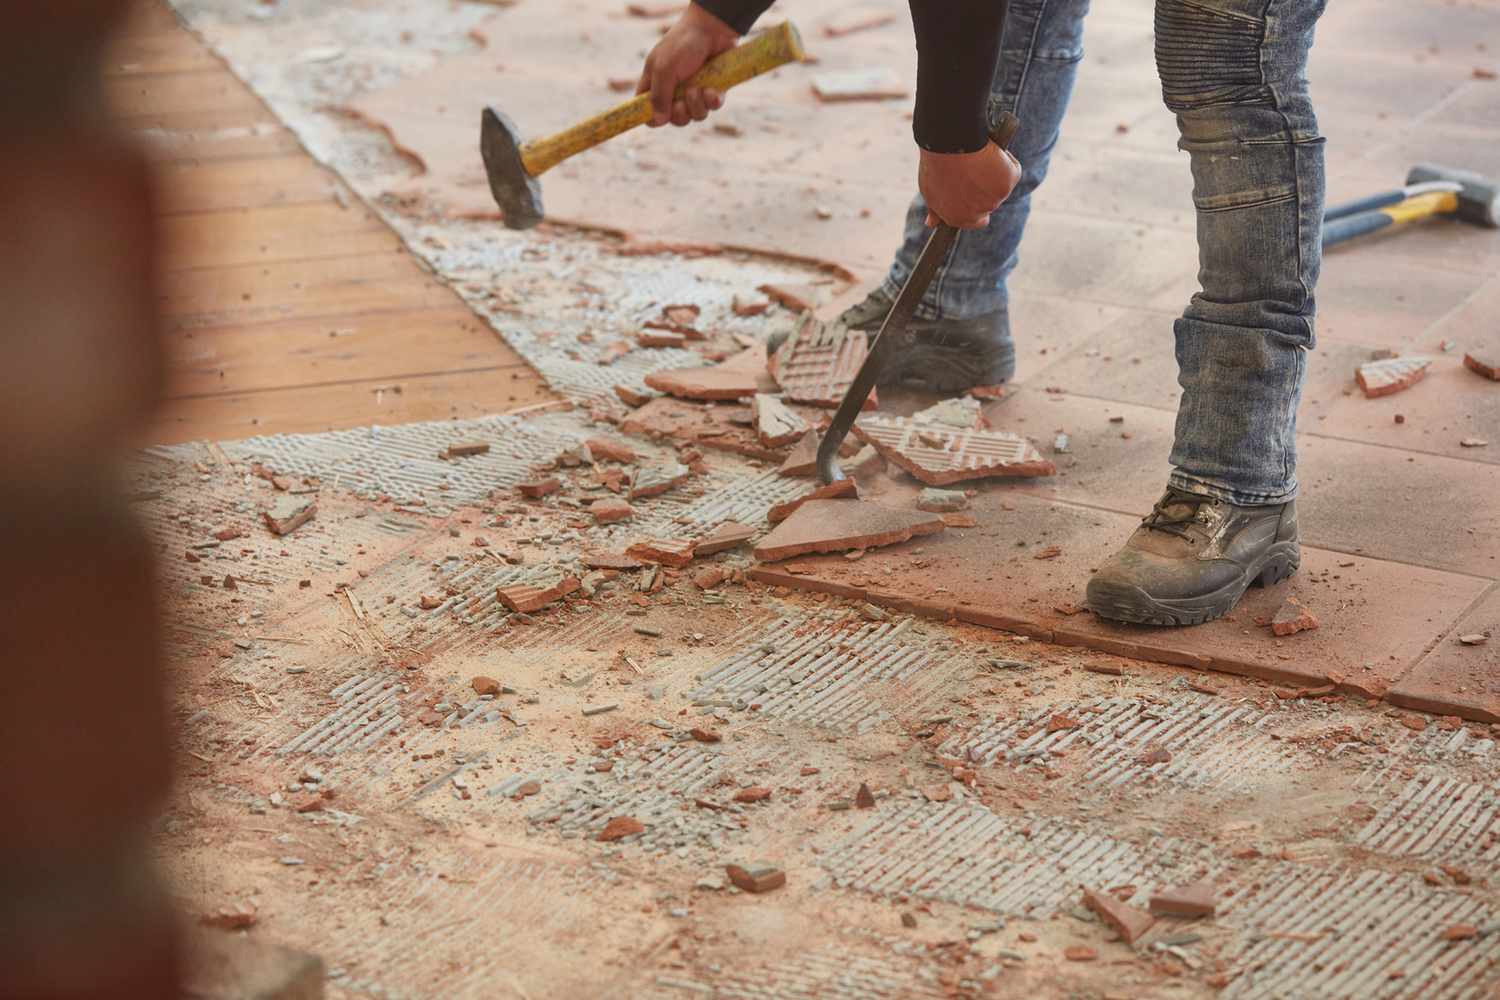 Ceramic floor tiles being removed with a masonry chisel and floor scraper by hand